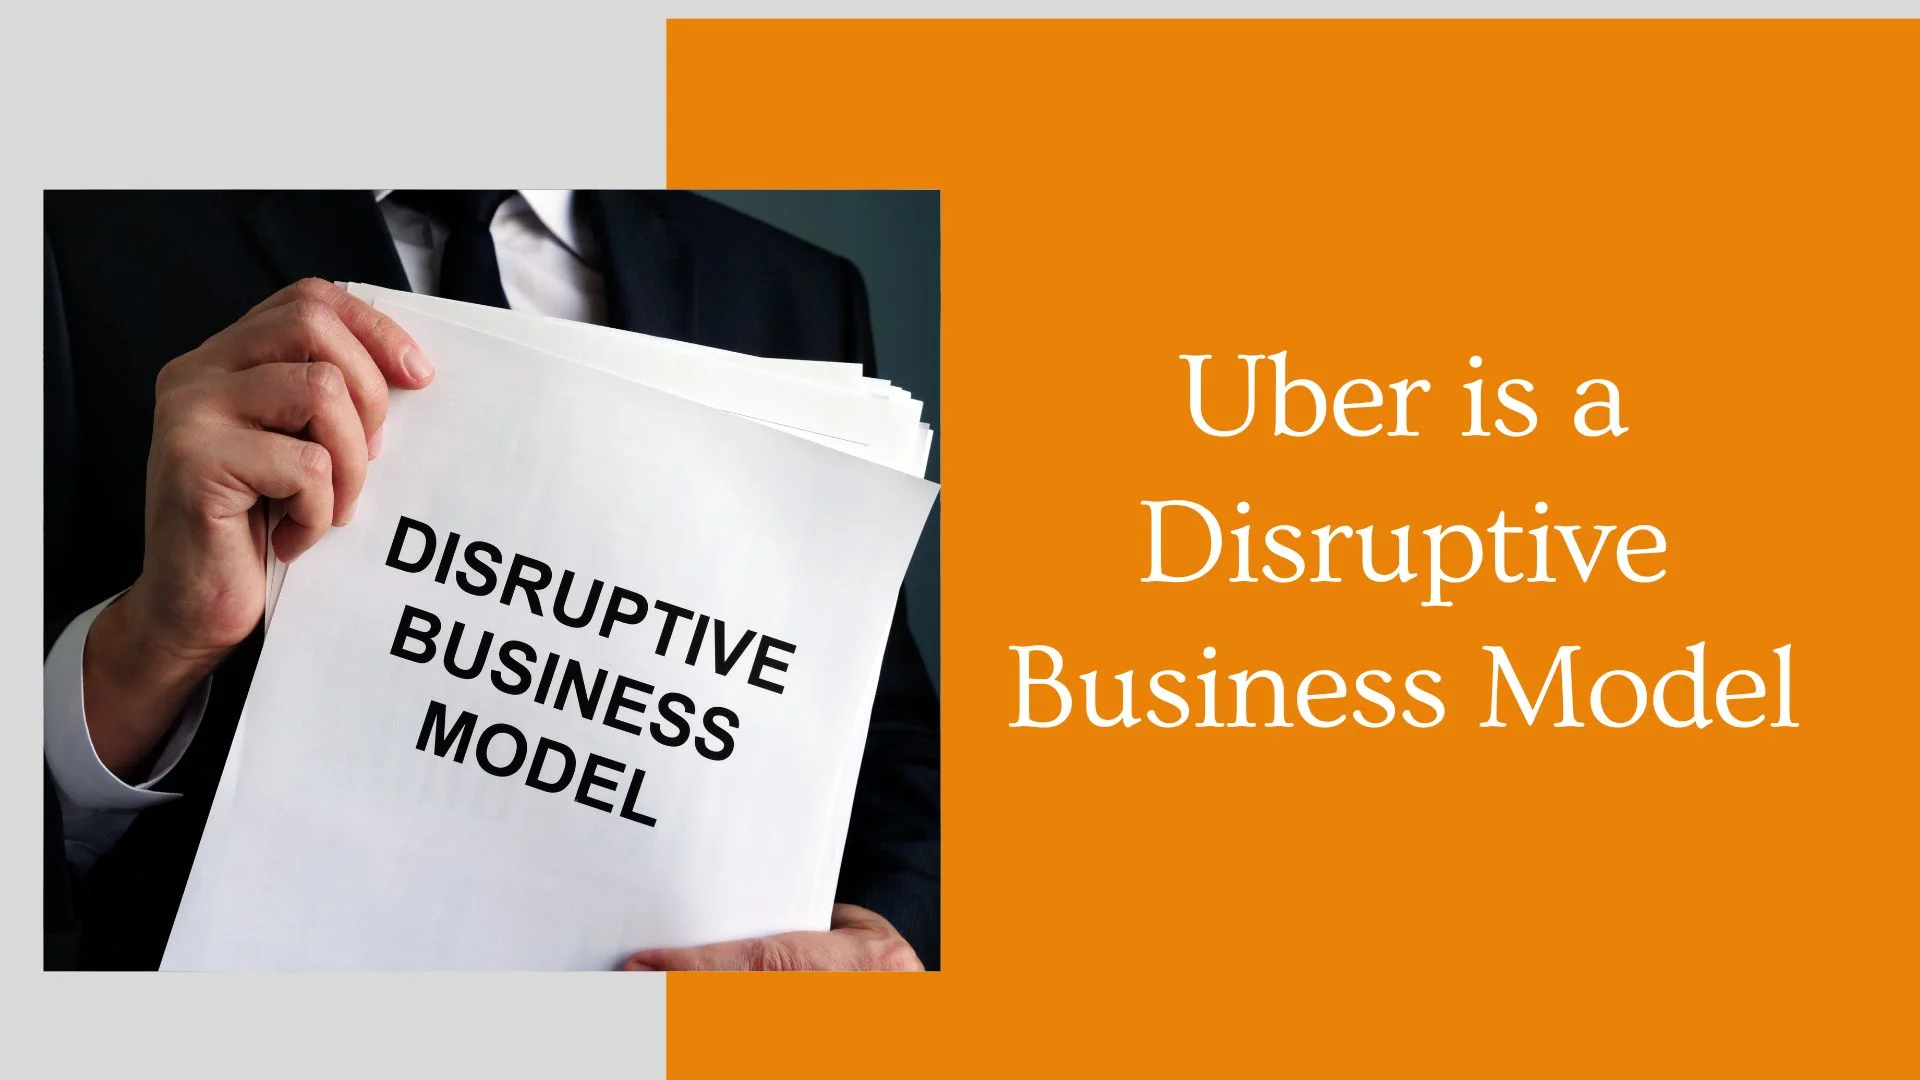 Uber is a Disruptive Business Model